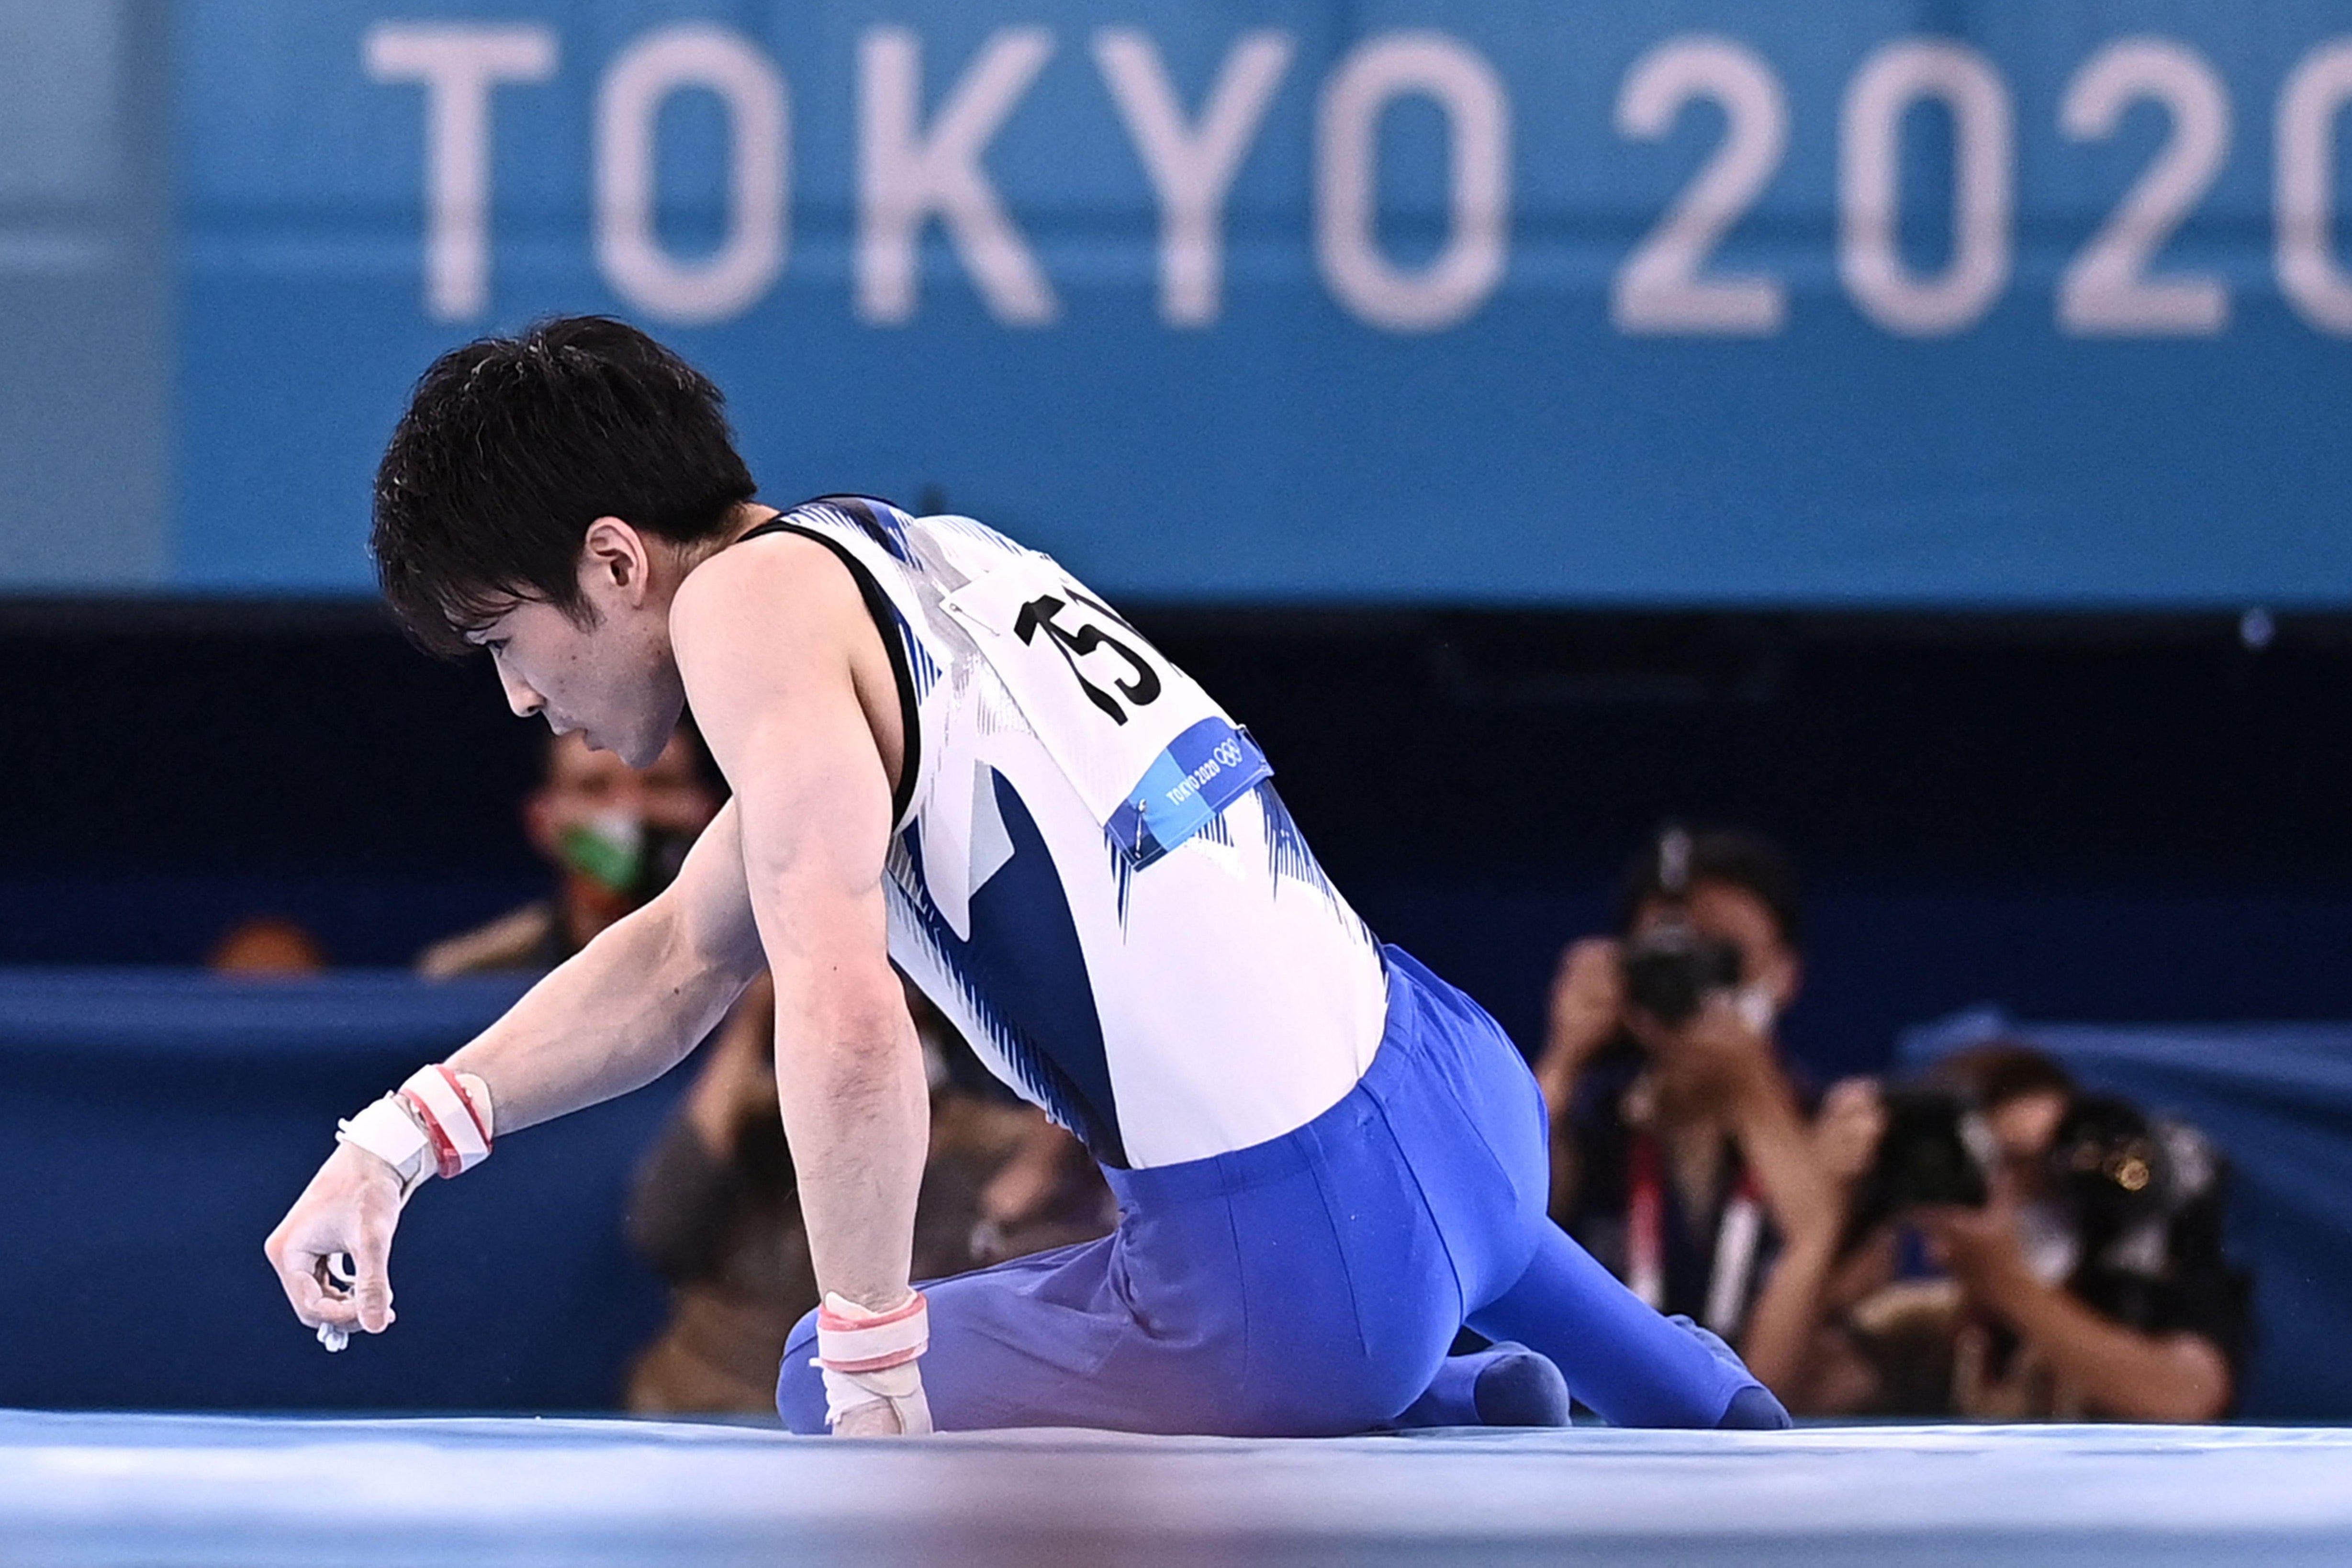 Japan's Kohei Uchimura on the mat looking to the side, a Tokyo 2020 logo in the background